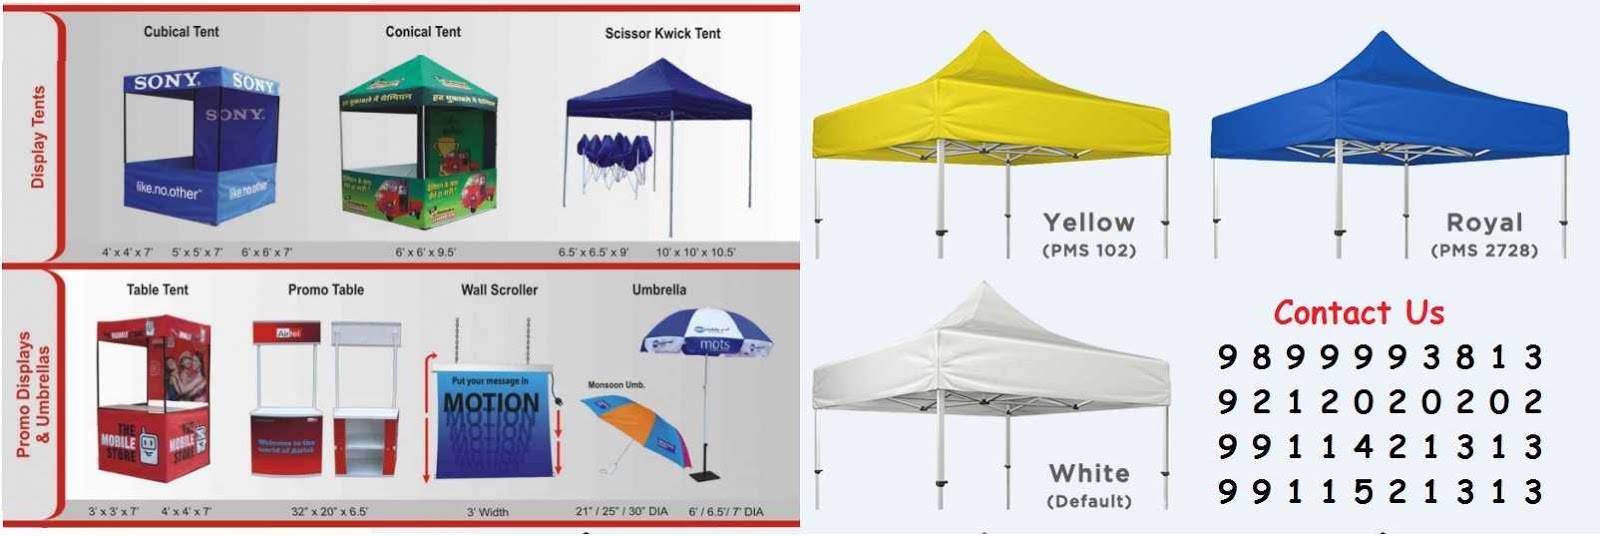 Manufacturer of Outdoor Pagoda Tents, Gazebos, Tensile Tents